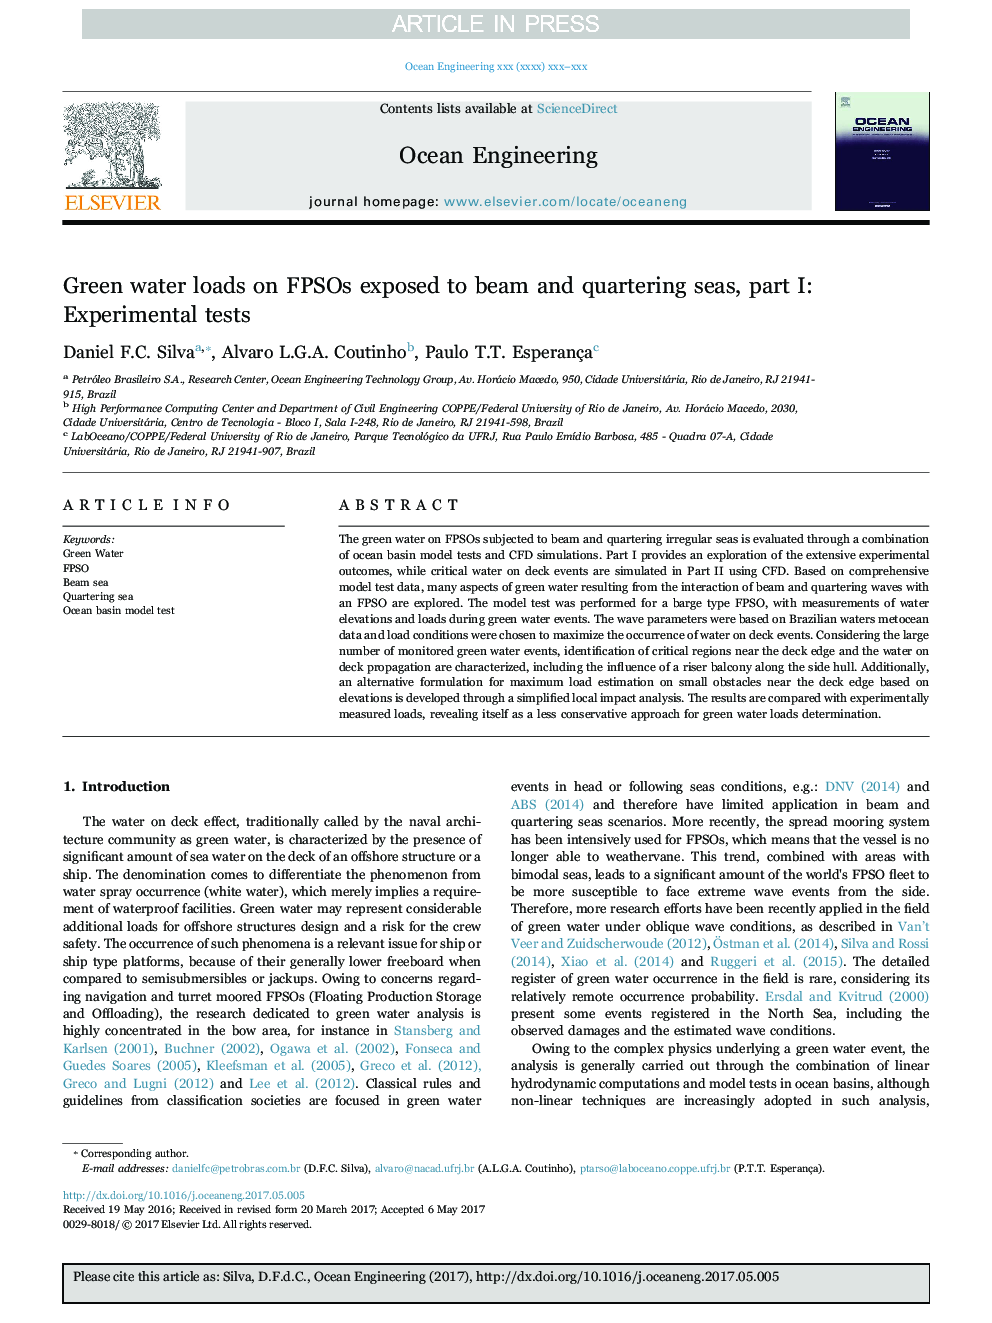 Green water loads on FPSOs exposed to beam and quartering seas, part I: Experimental tests